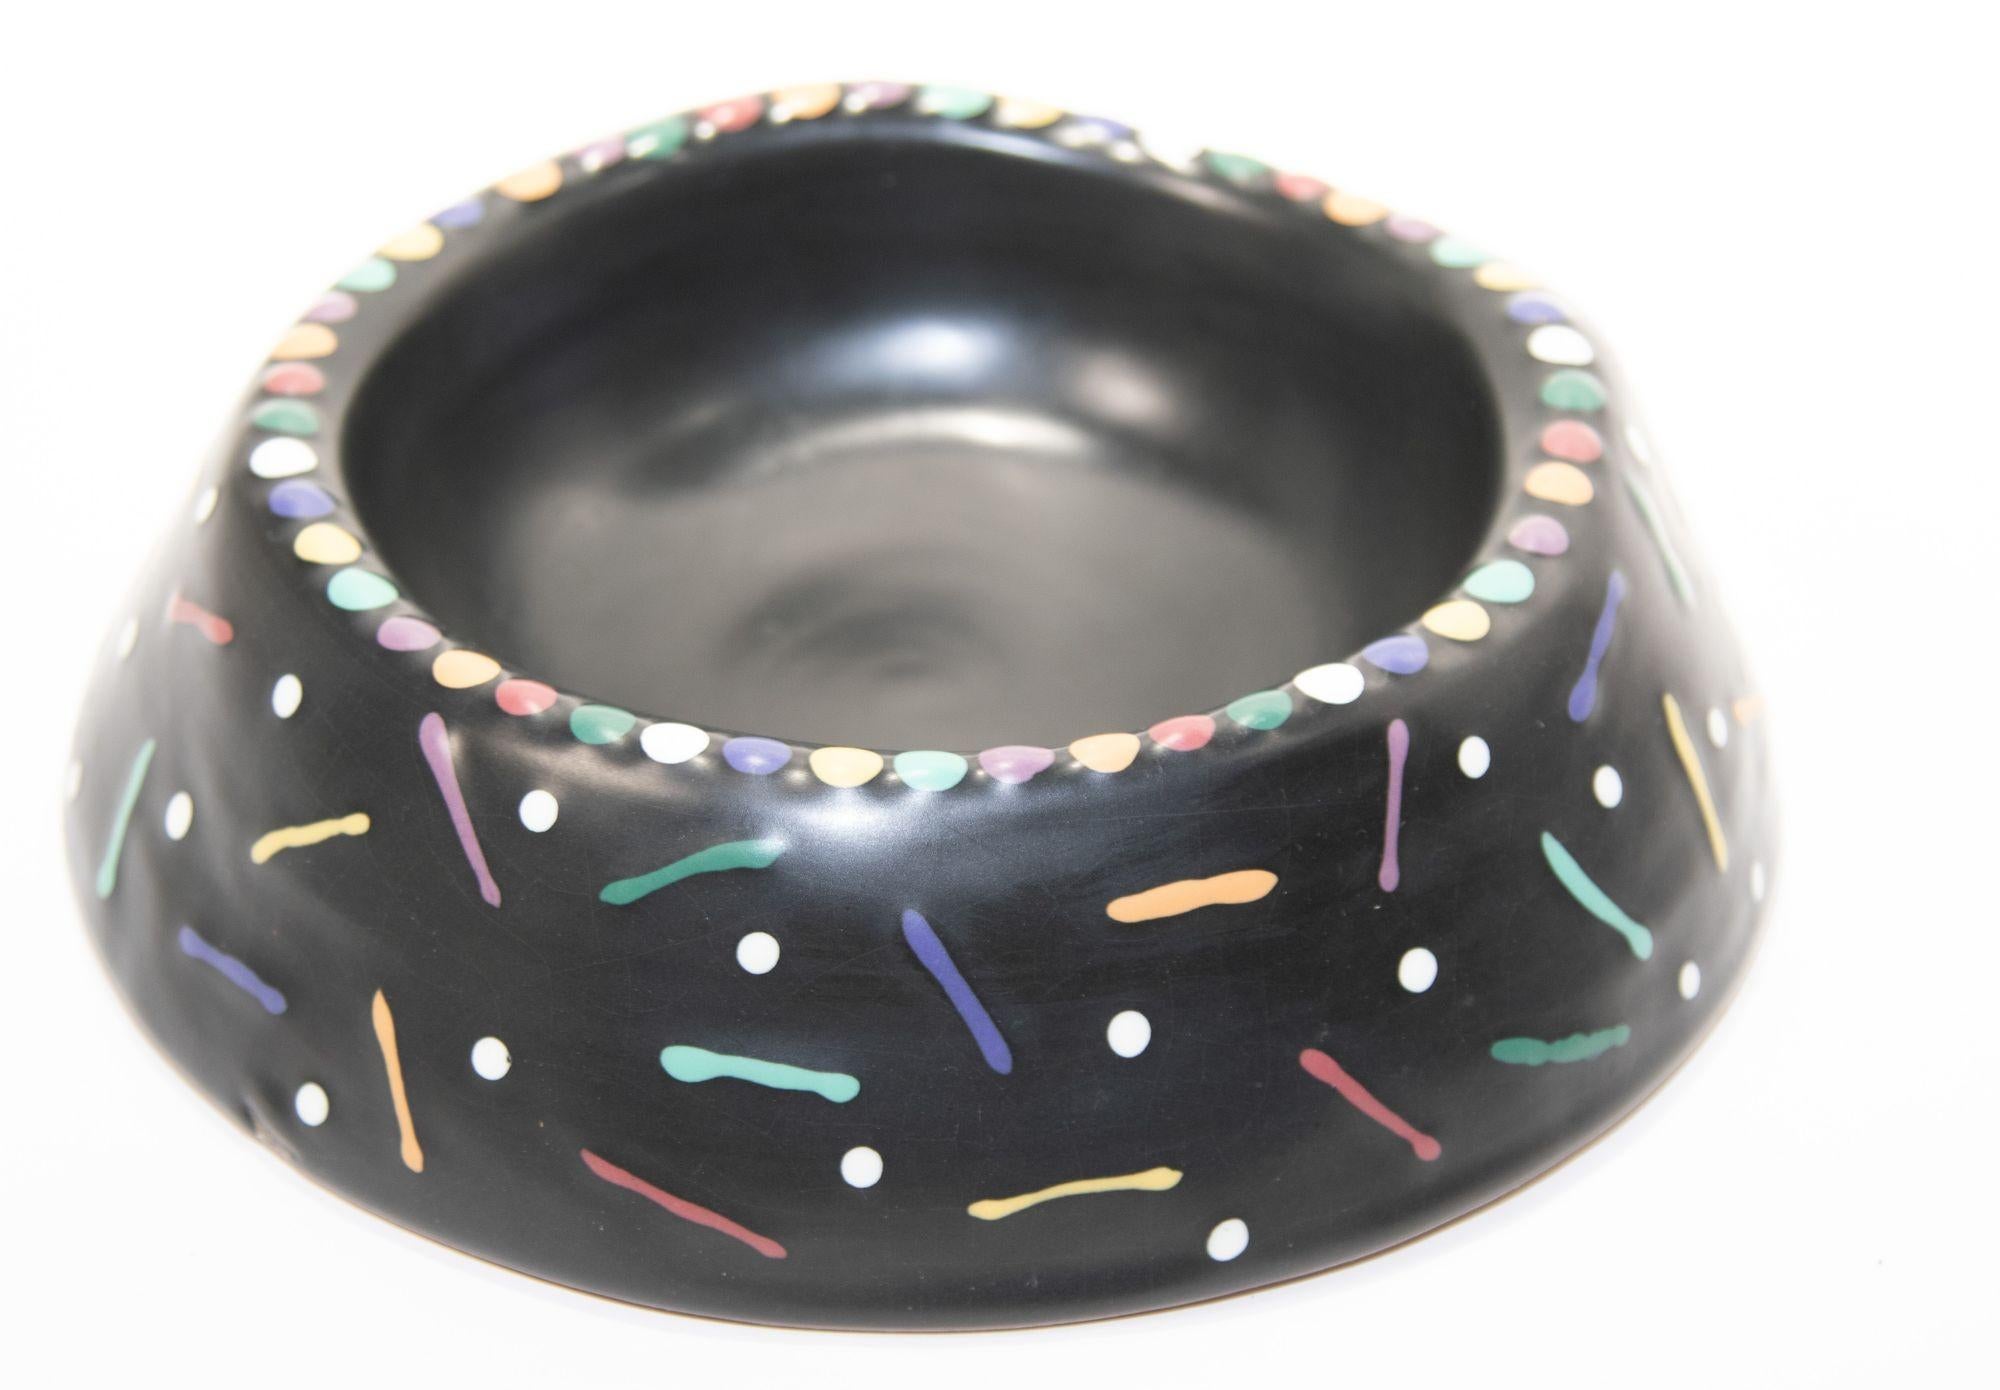 1994 Handcrafted ceramic bowl Signed by Luna Garcia.
Large ceramic bowl in black glazed with polychrome dots and marked with a large inscription 